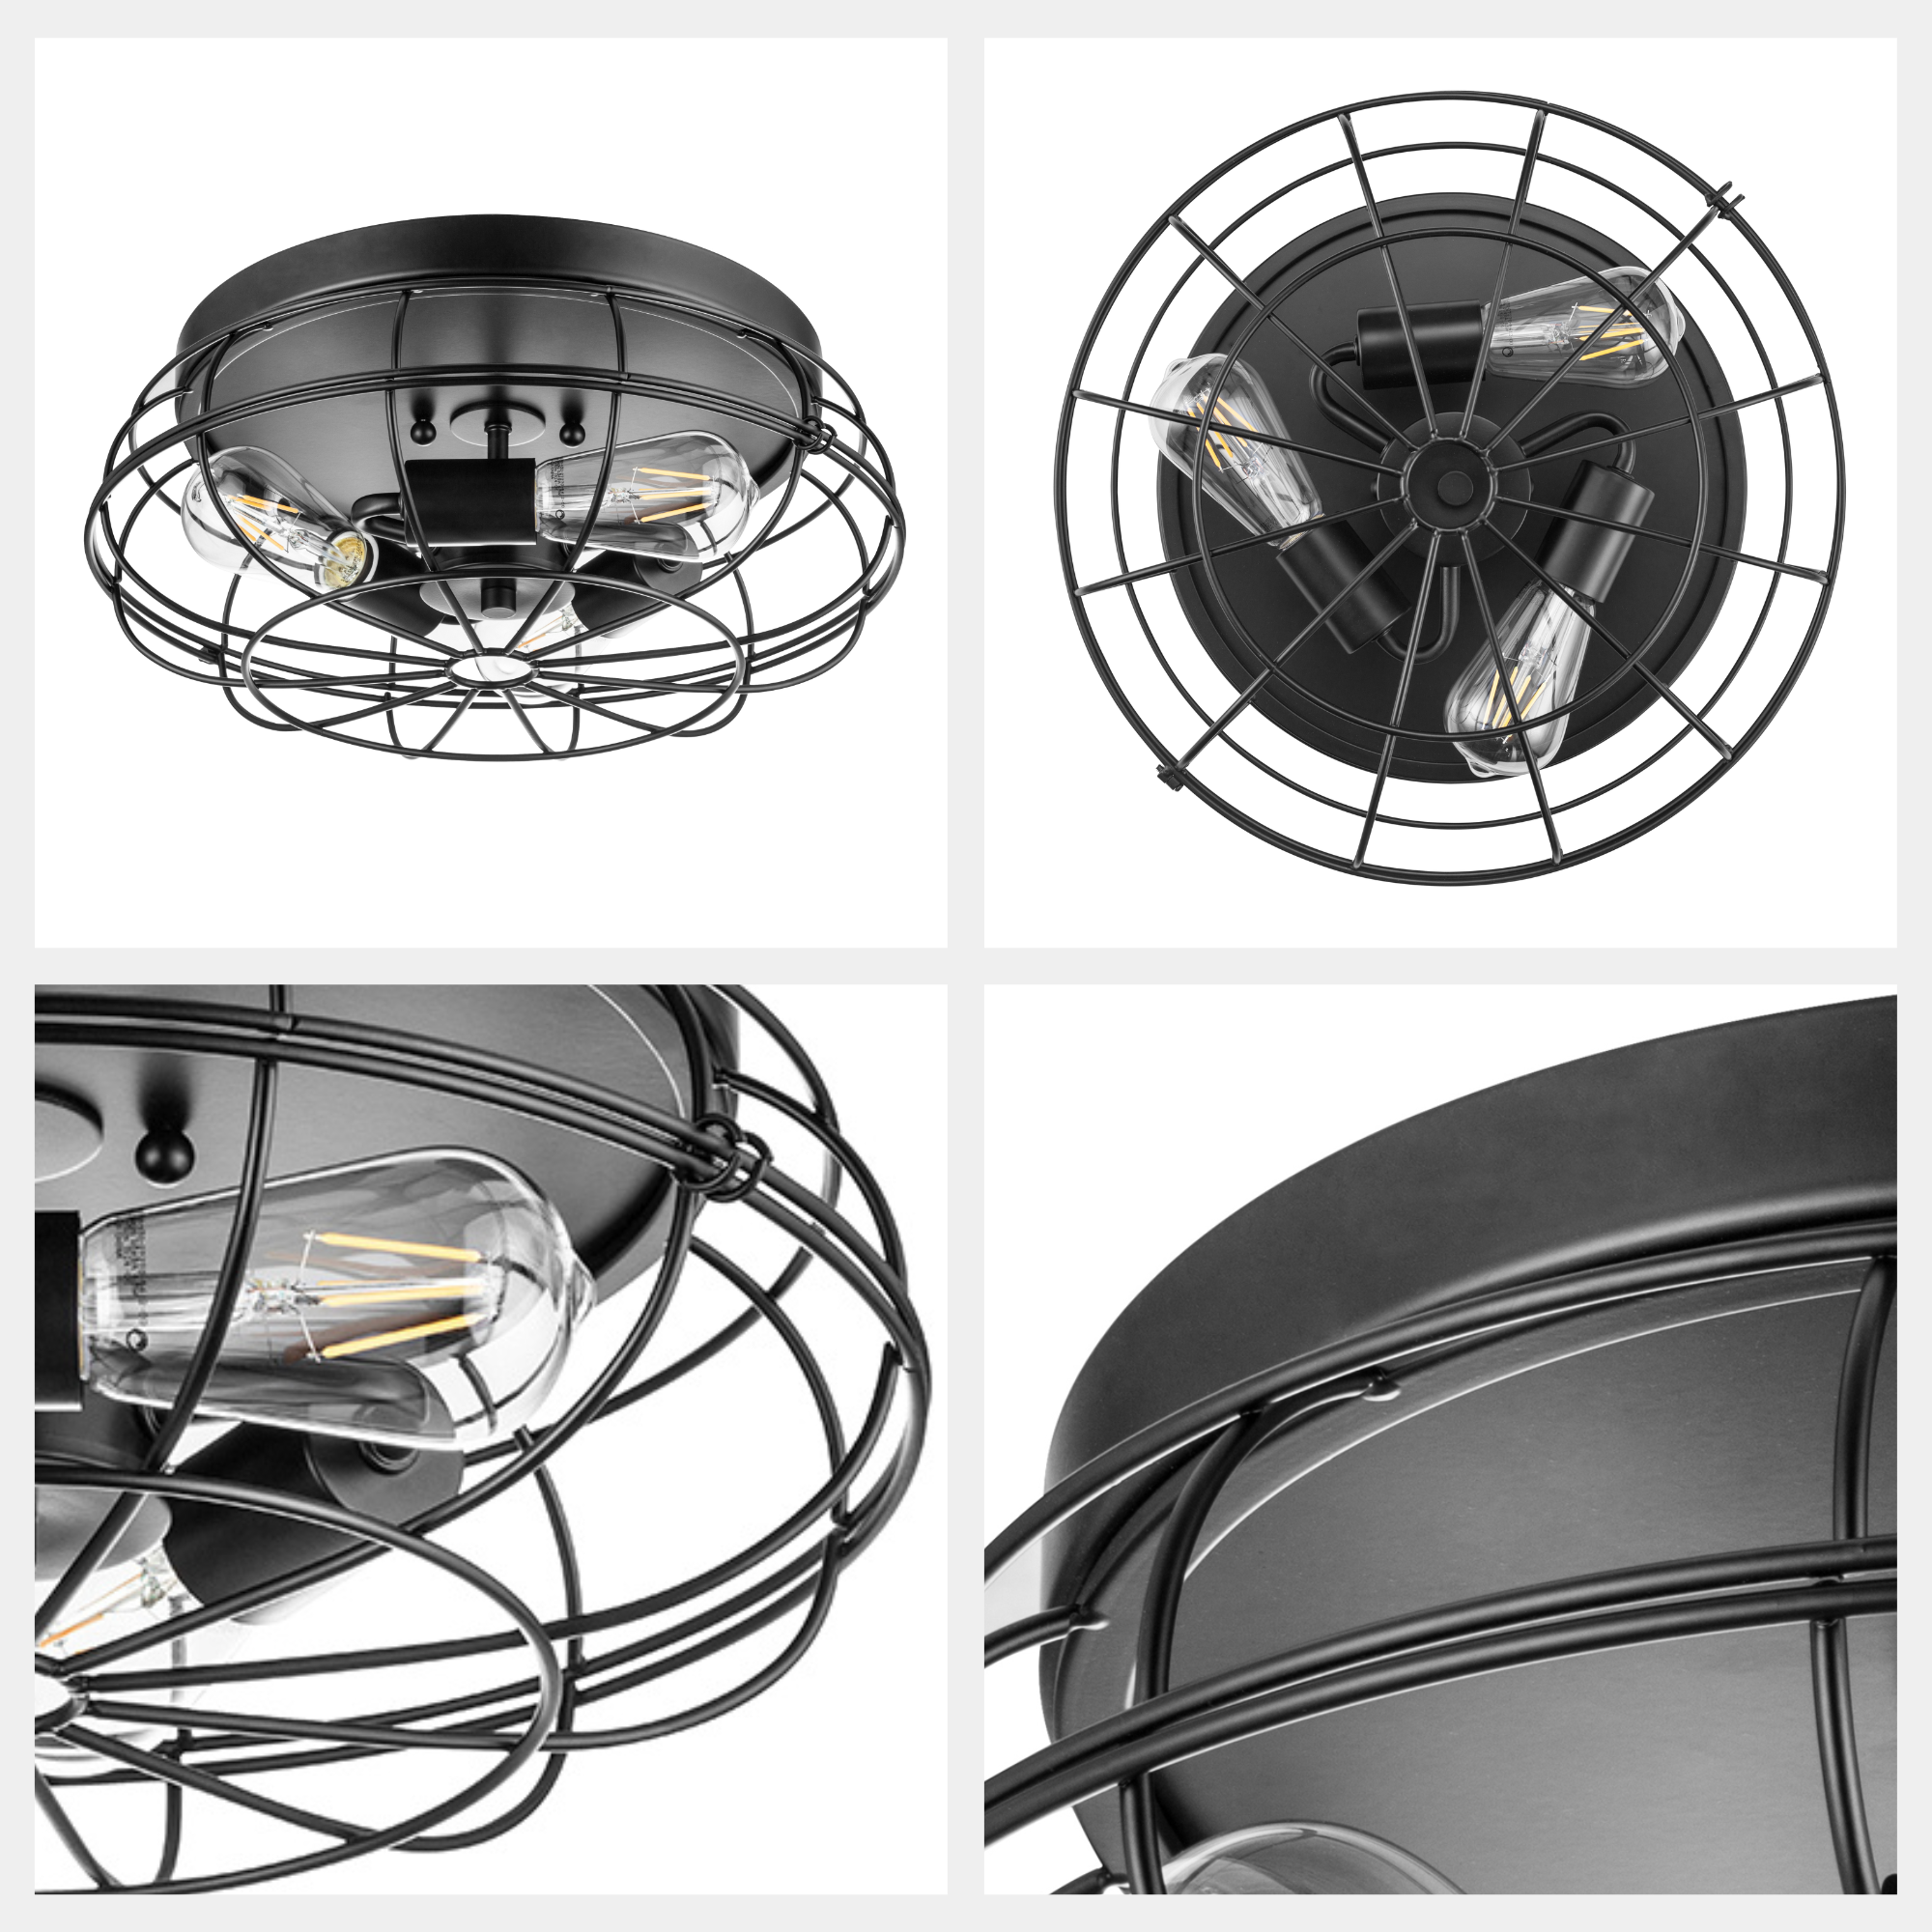 Lincoln Woods, Industrial Flushmount Light Fixture, Wire Cage, Matte Black by Prominence Home